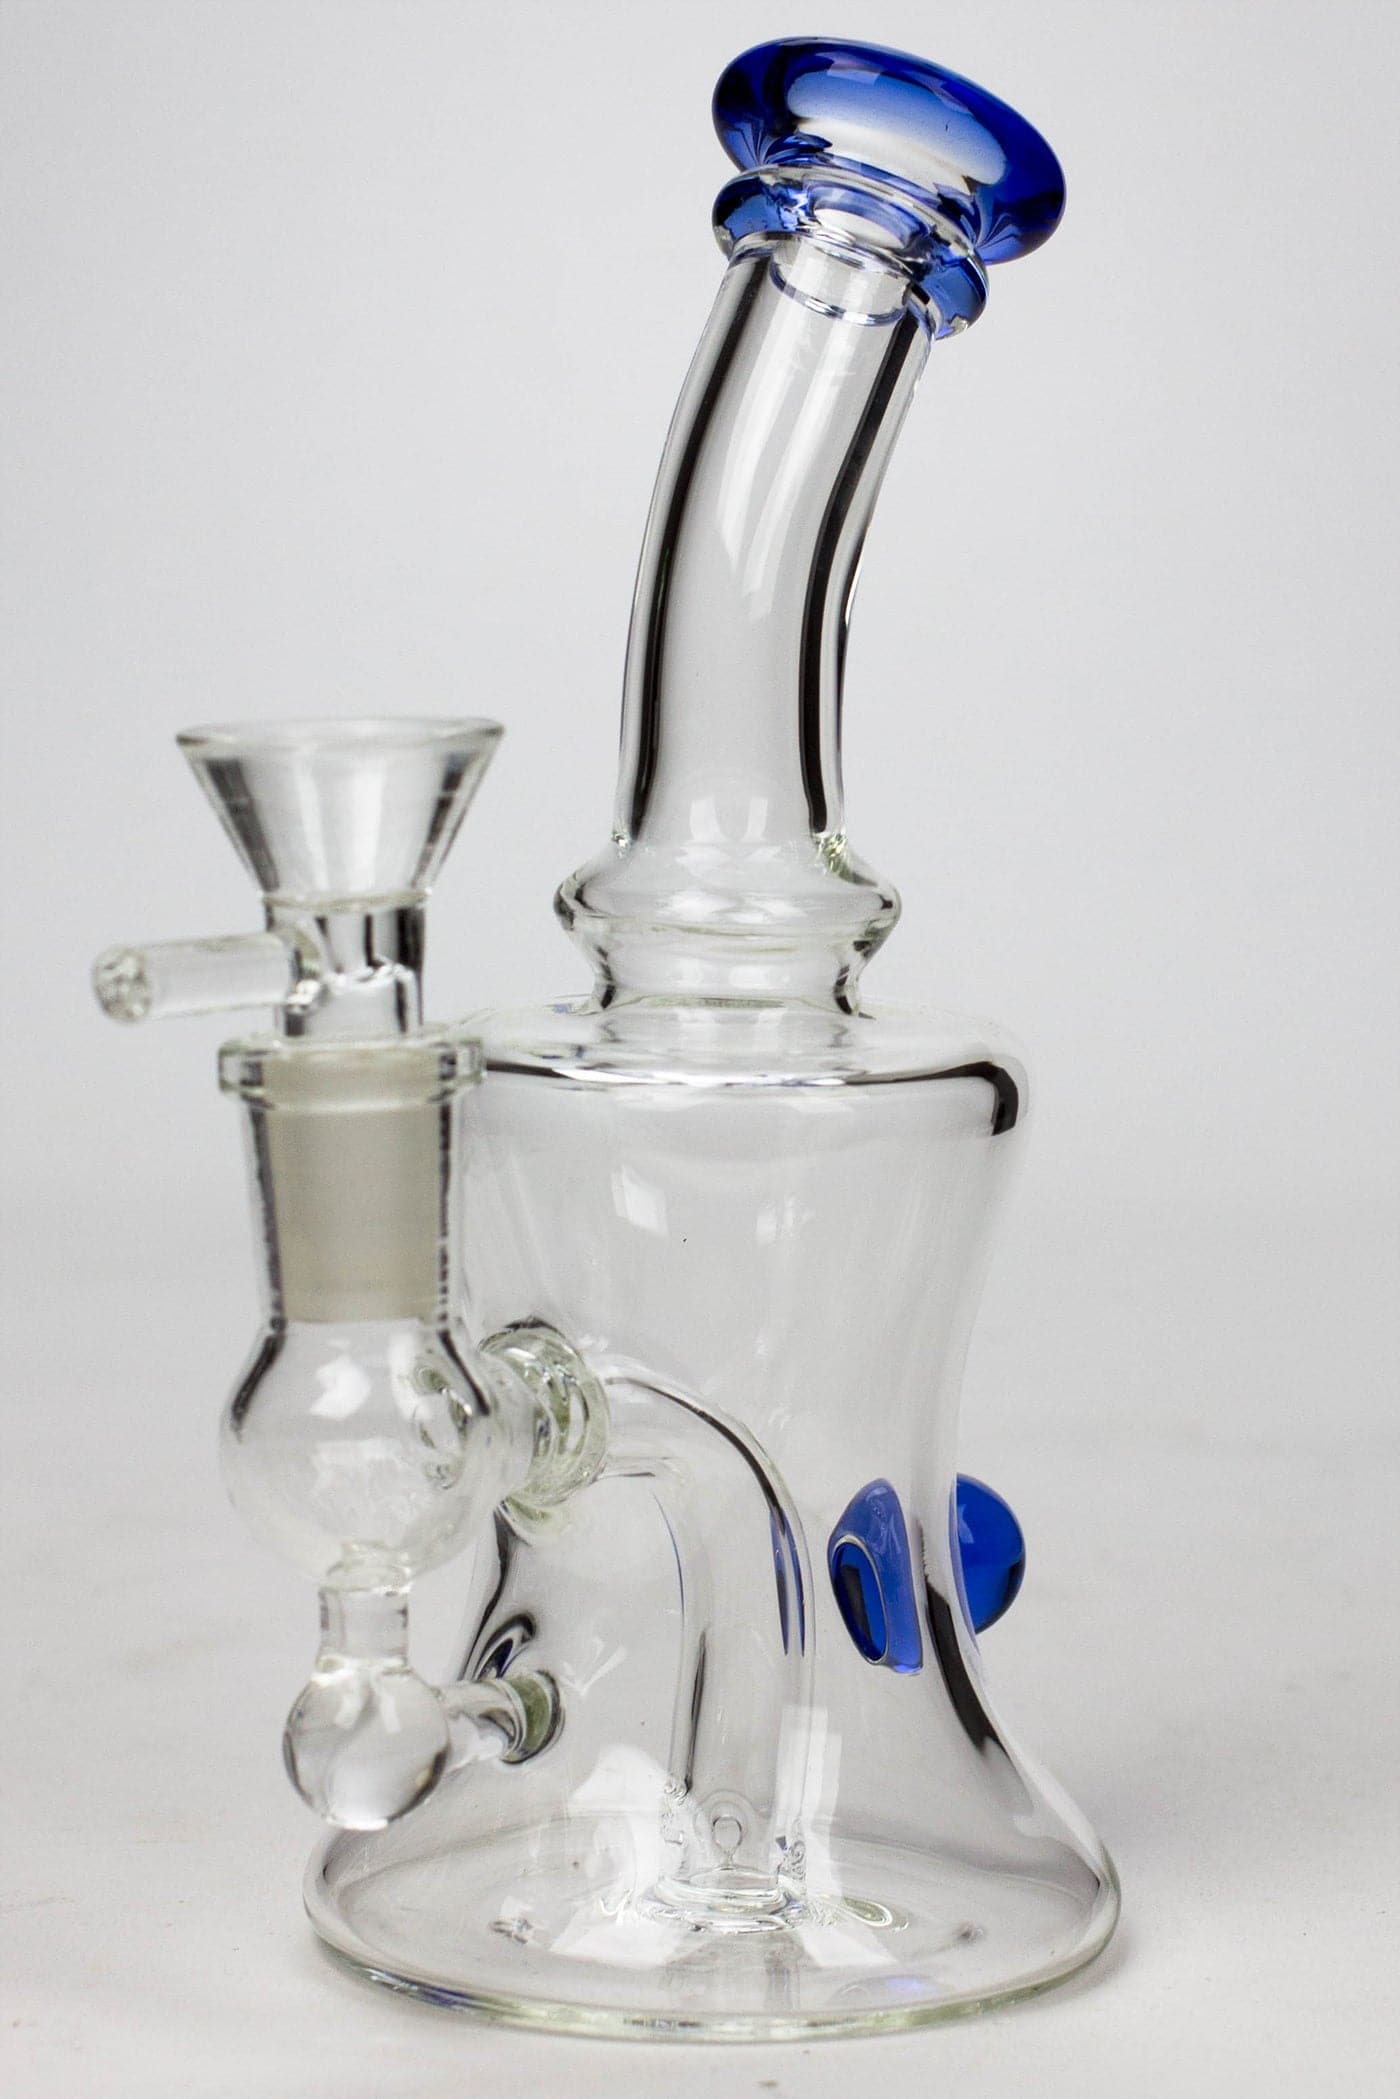 Fixed 3 hole diffuser skirt bubbler_12